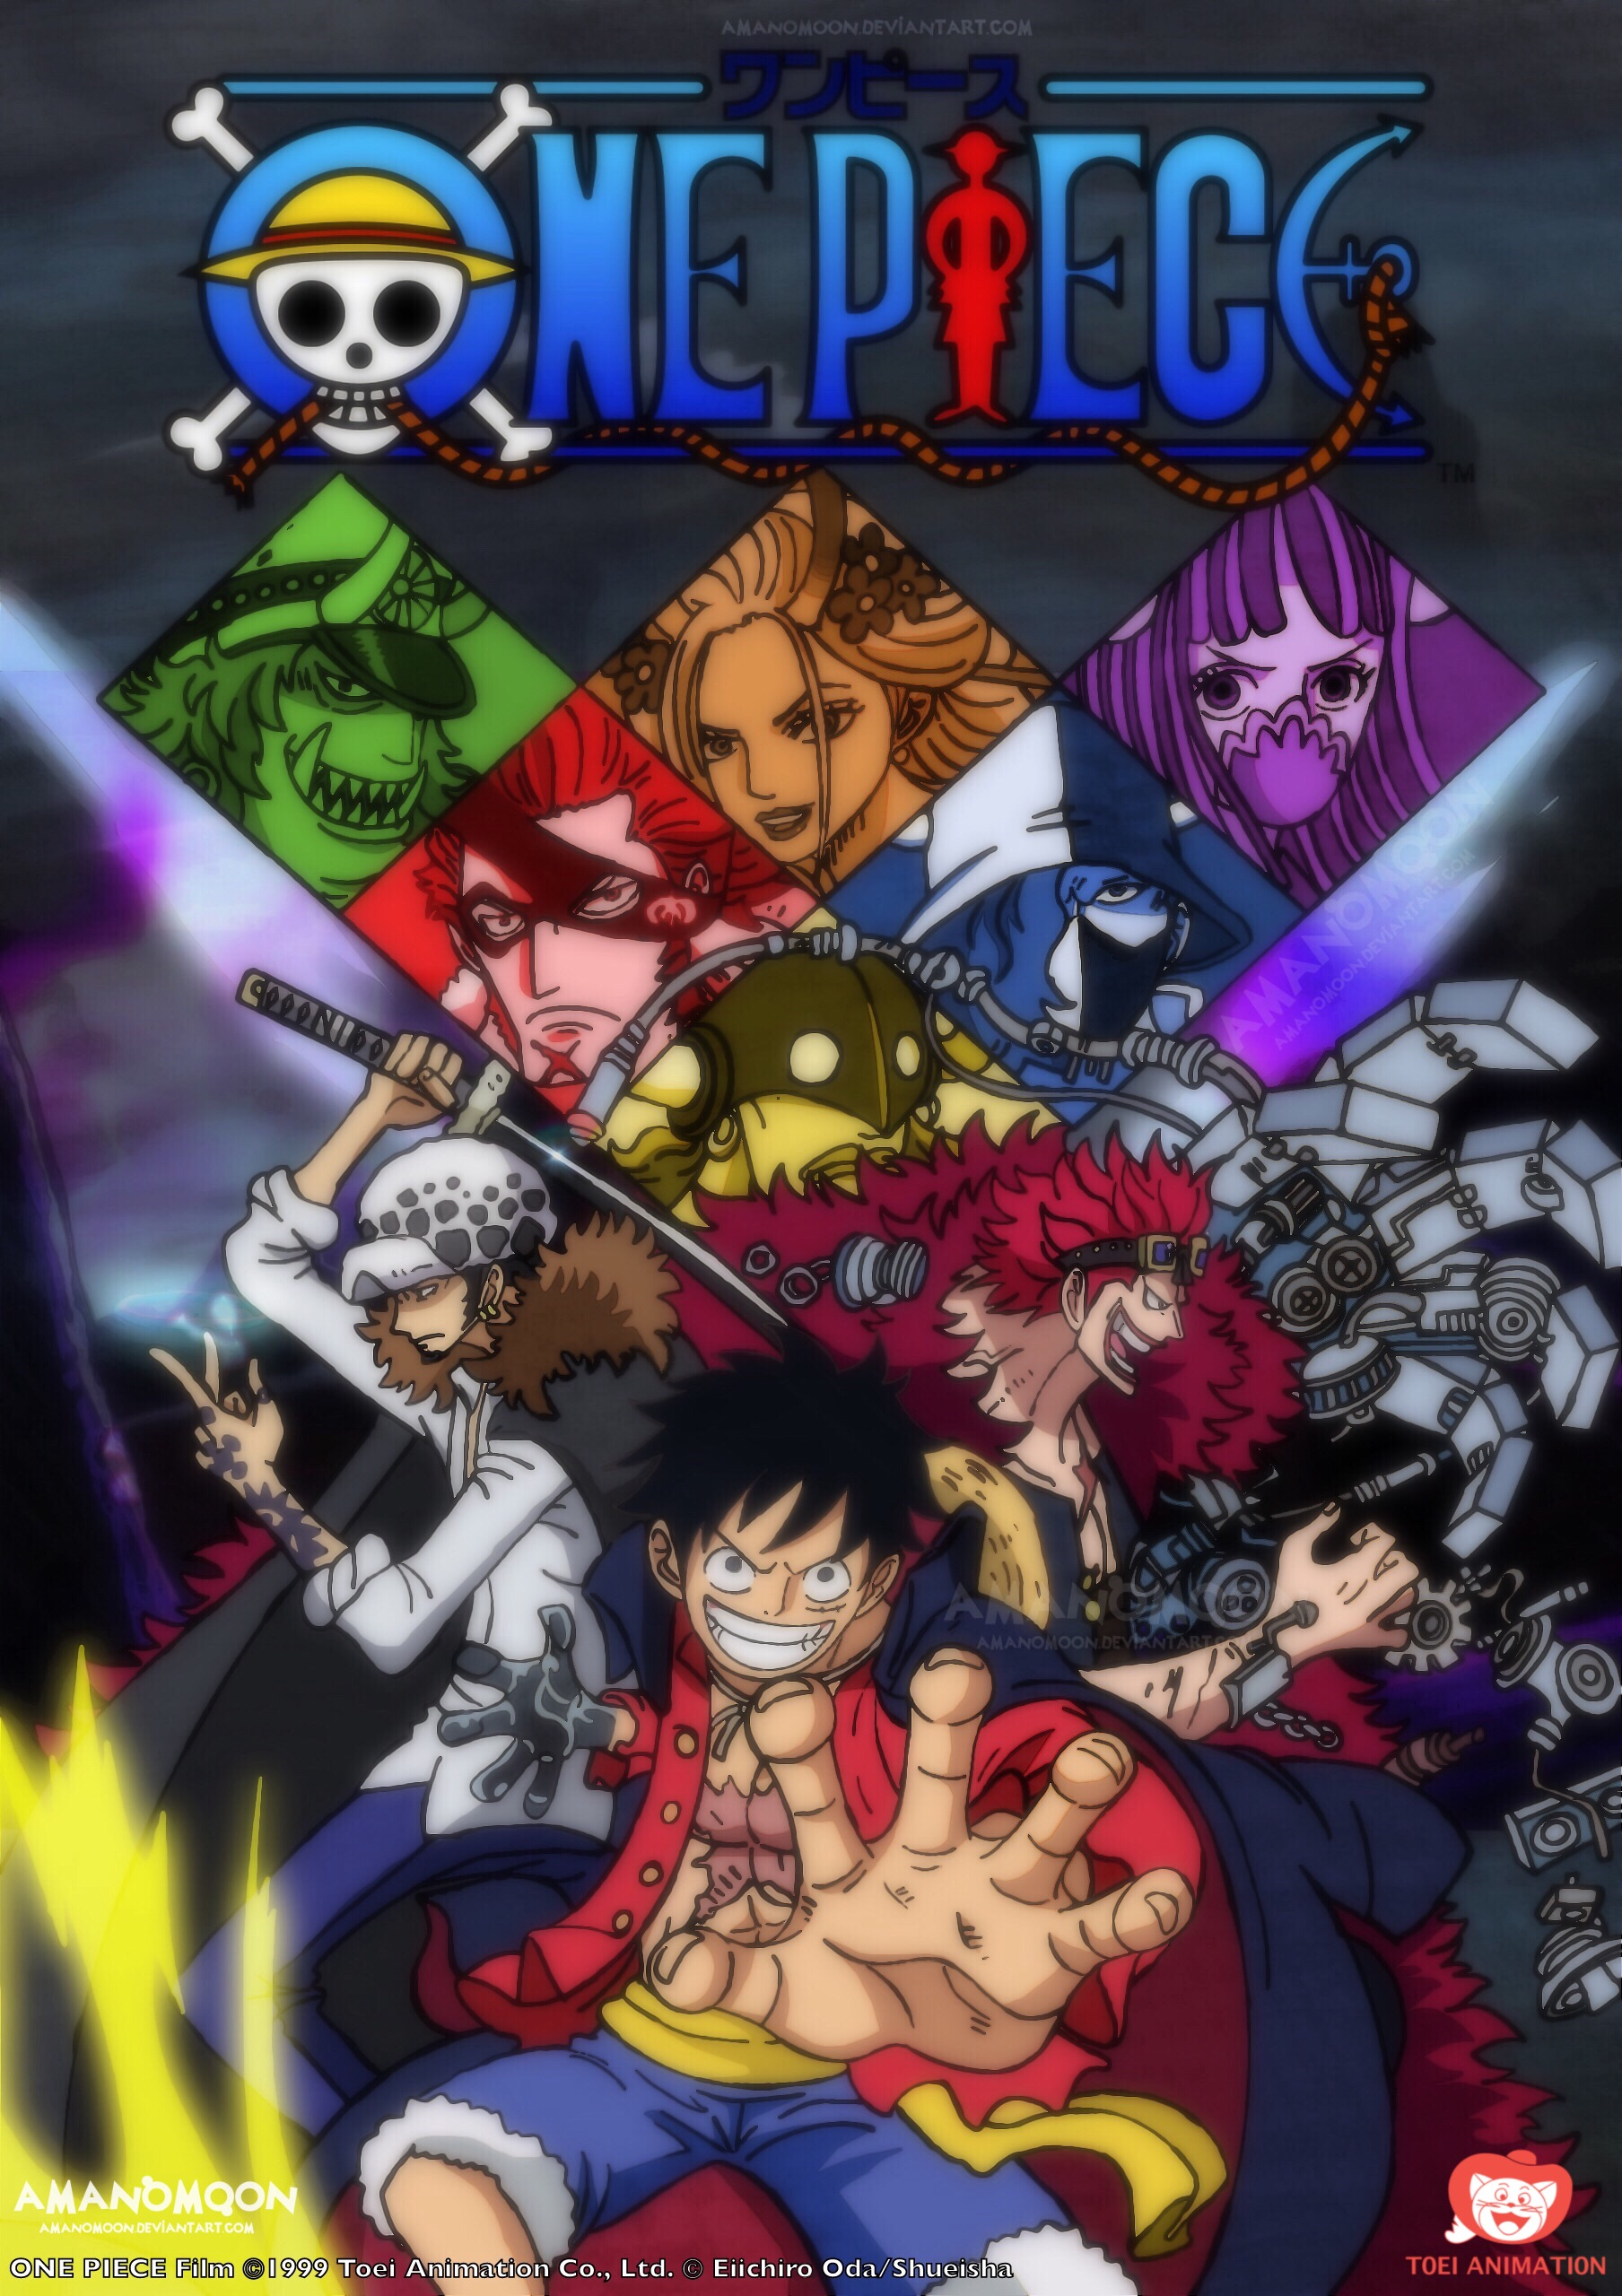 One Piece Volume Tome 97 Wano Colors Anime Style By Amanomoon On Deviantart